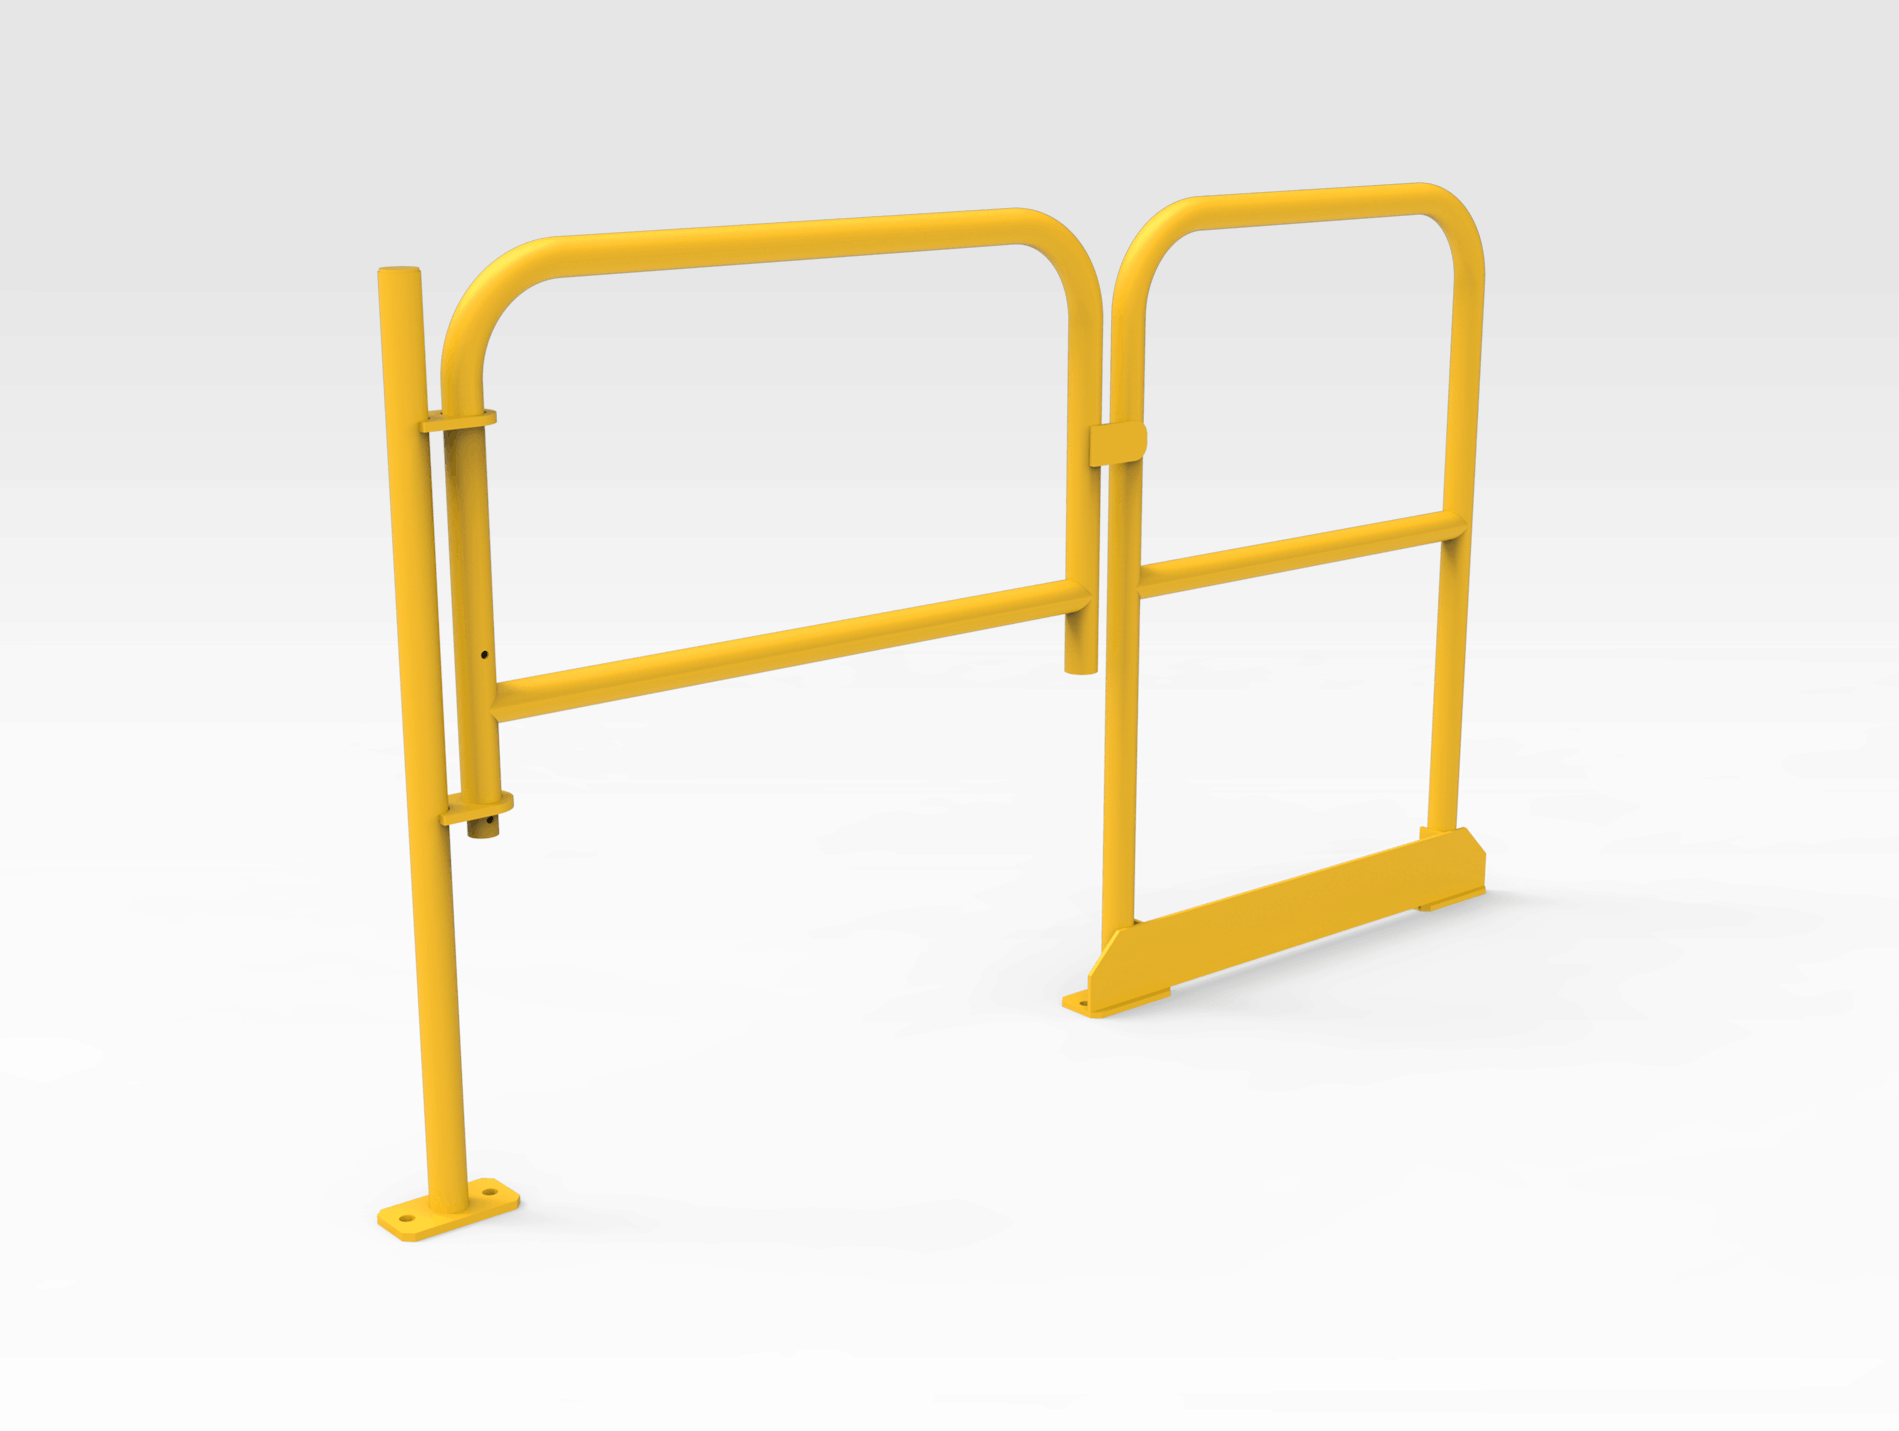 https://www.bendtechgroup.com.au/wp-content/uploads/2020/02/5502640-Self-closing-Gate-with-Handrail-LH.png